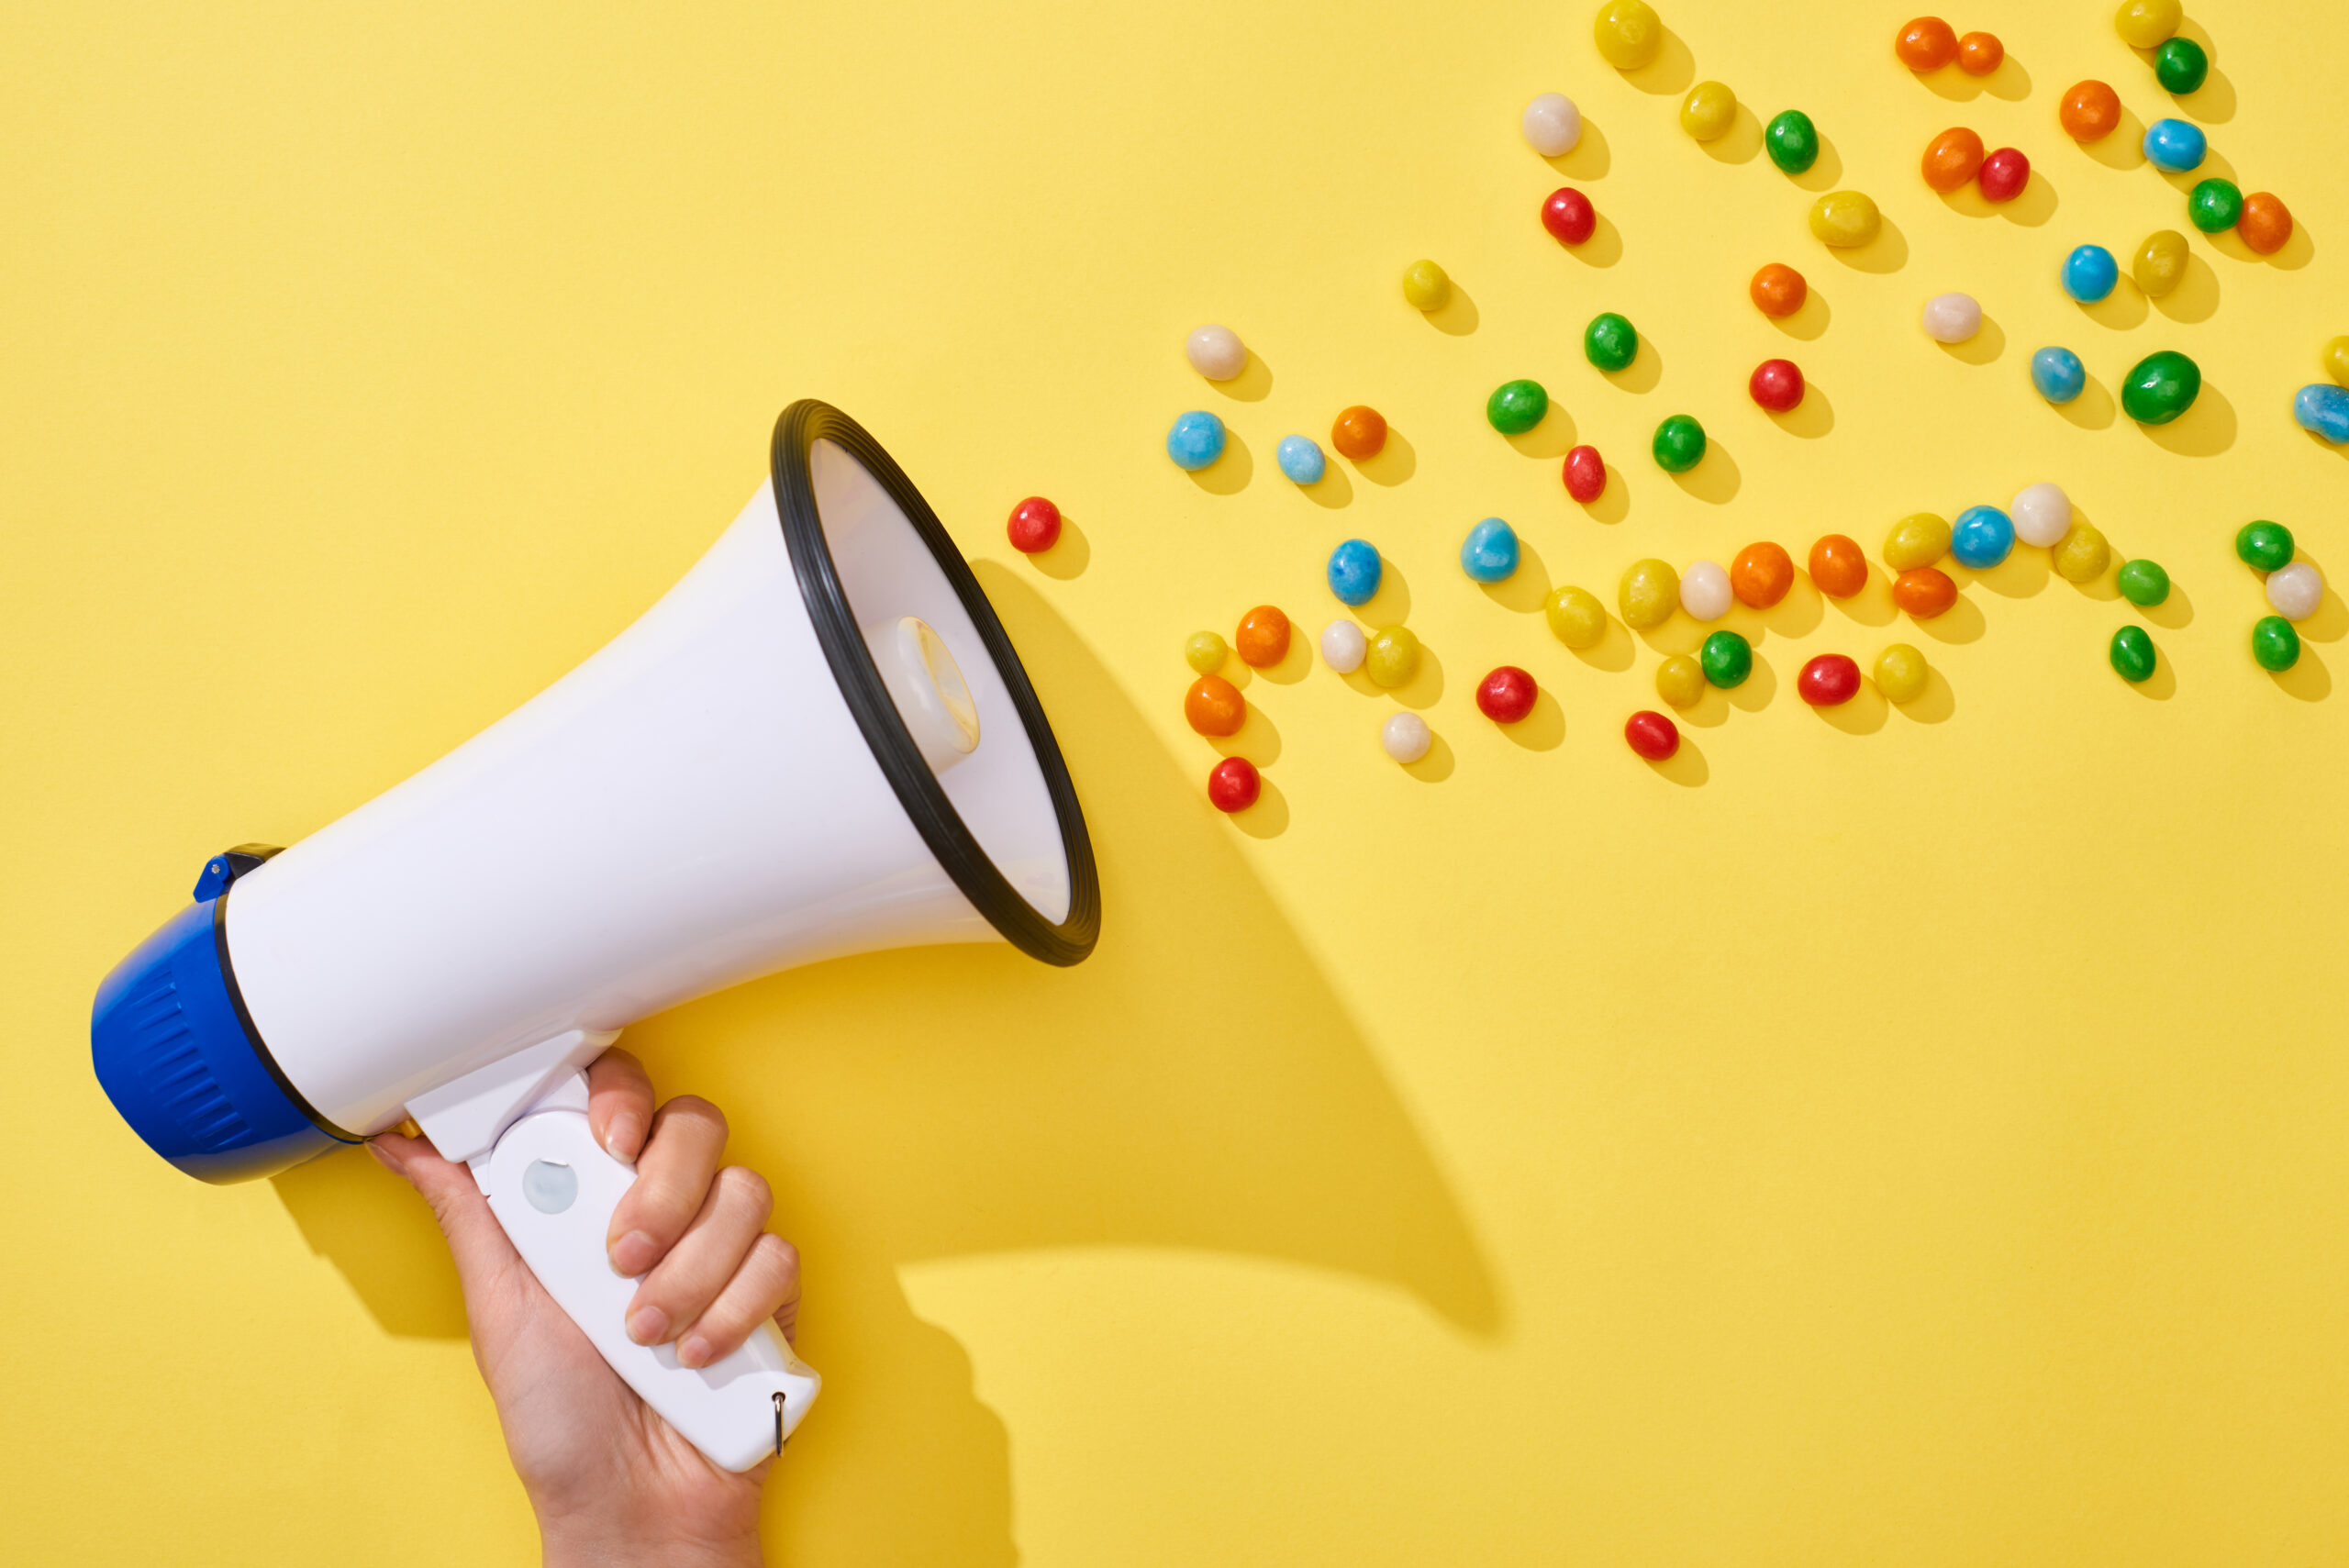 a woman holds a megaphone on a yellow background; the megaphone has rainbow candy coming out of it